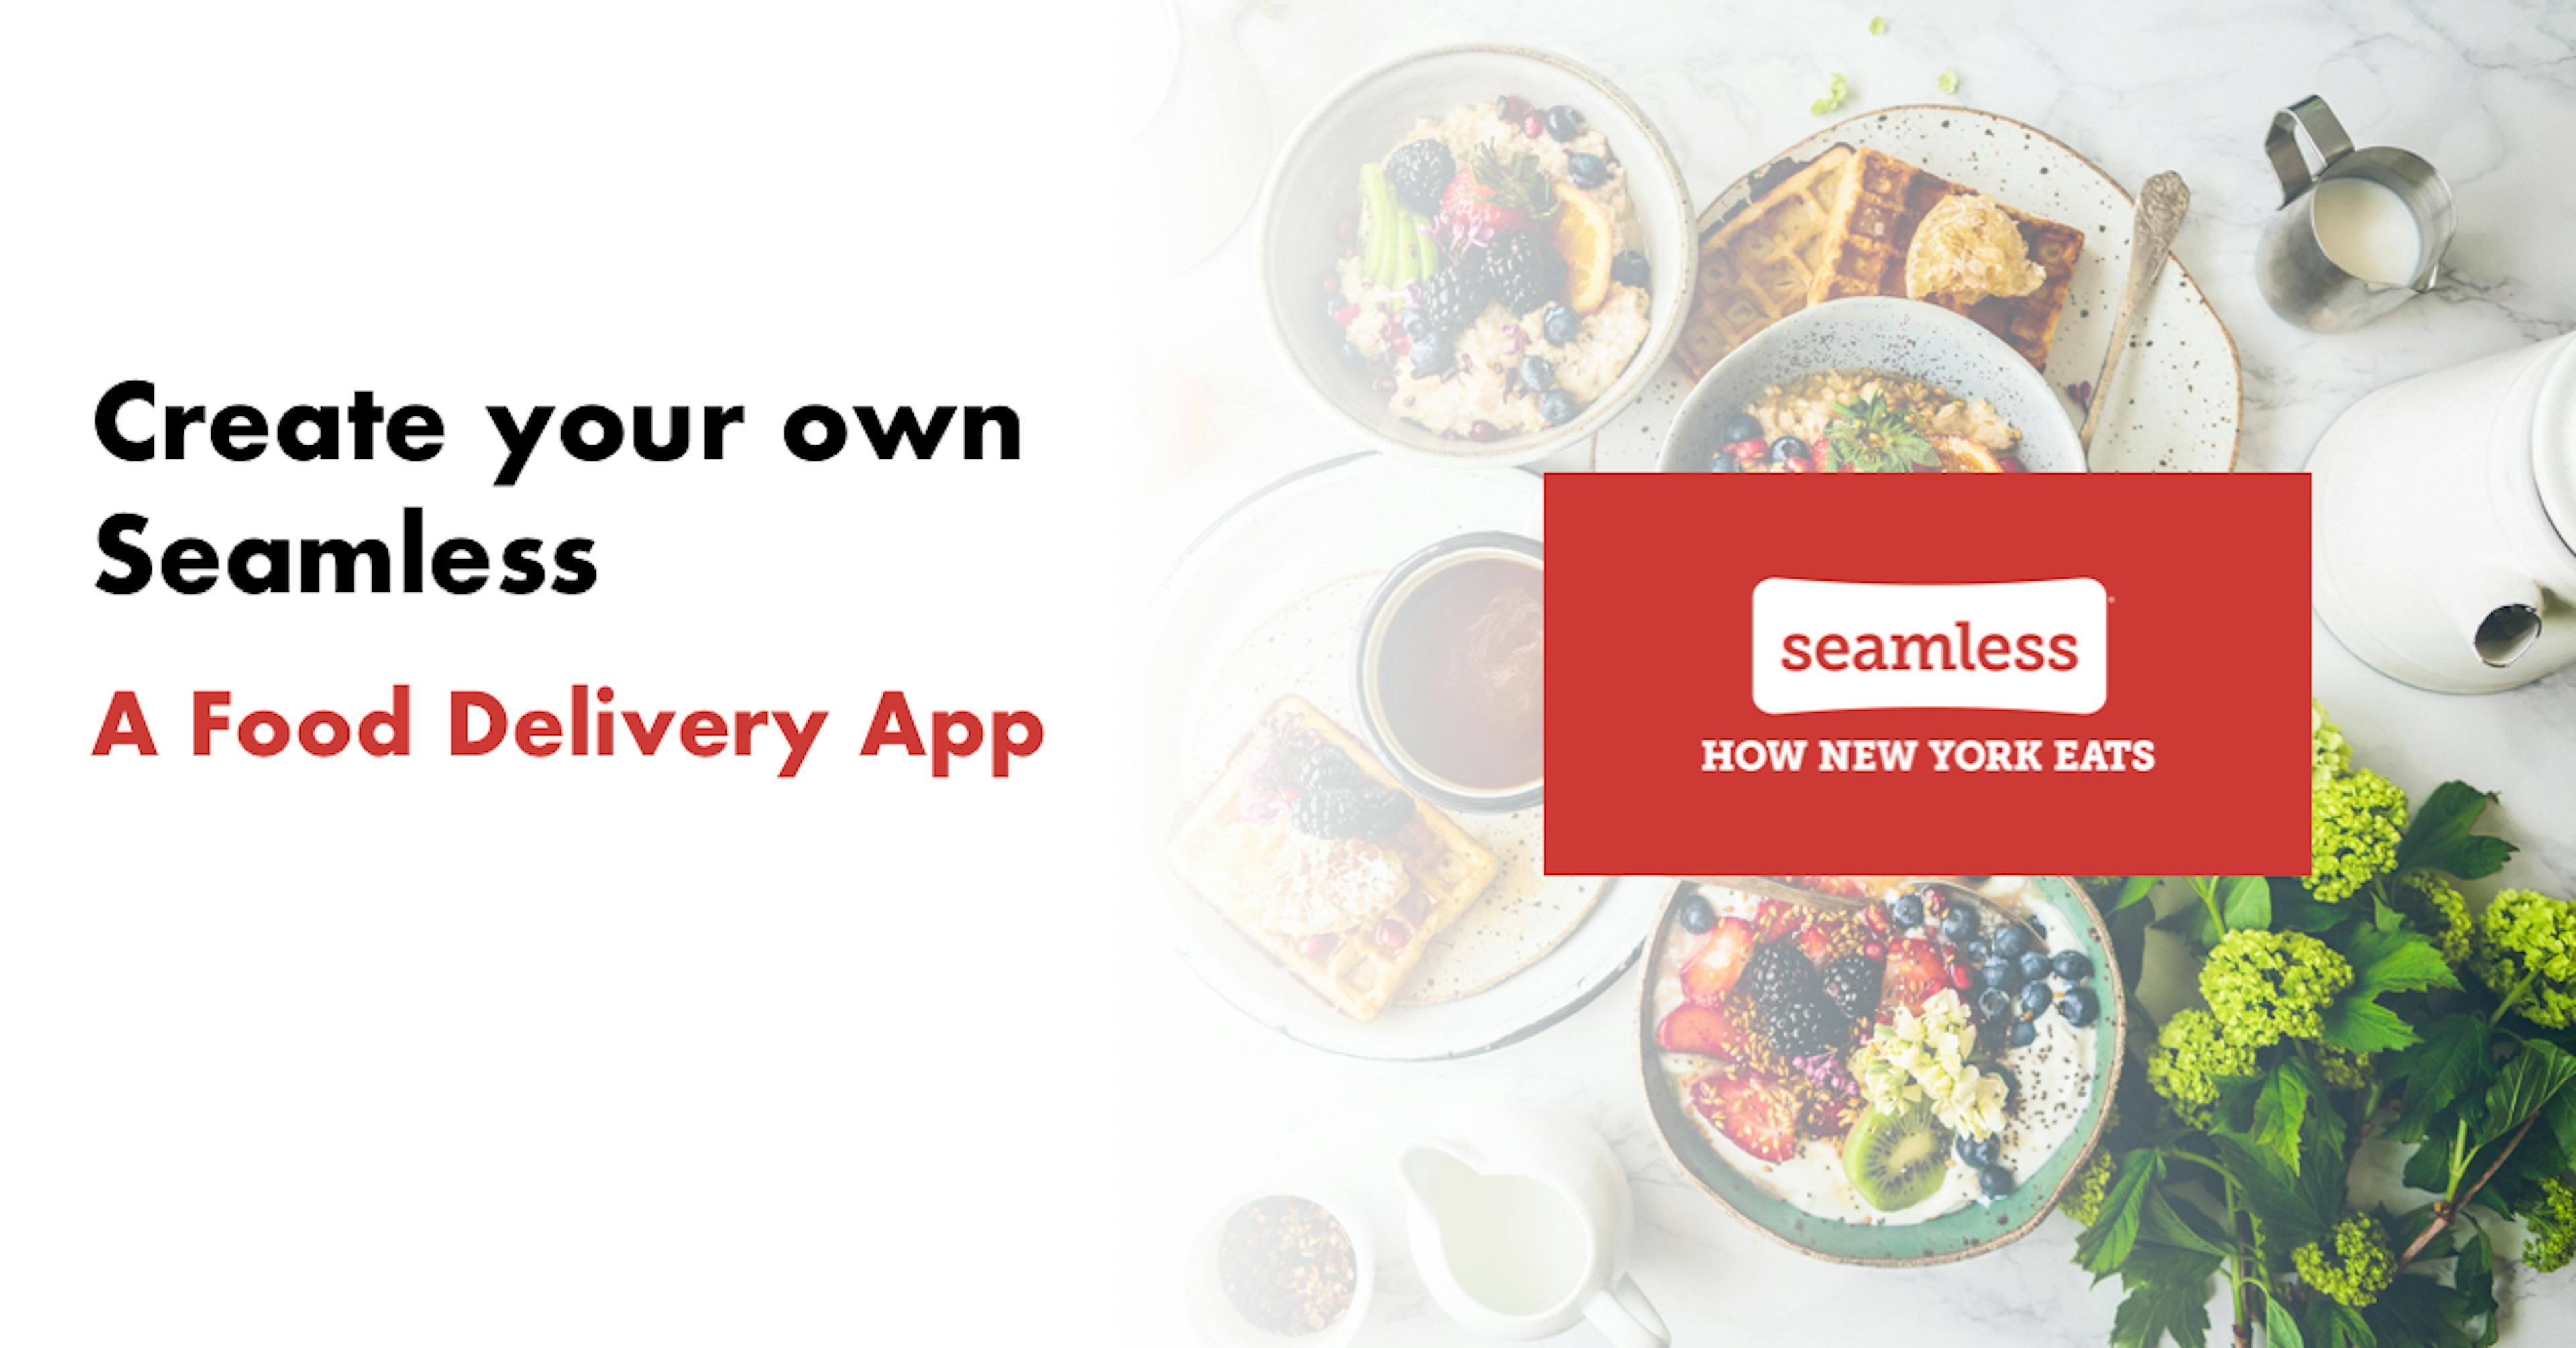 featured image - Create Your Own Seamless: Food Delivery App Features